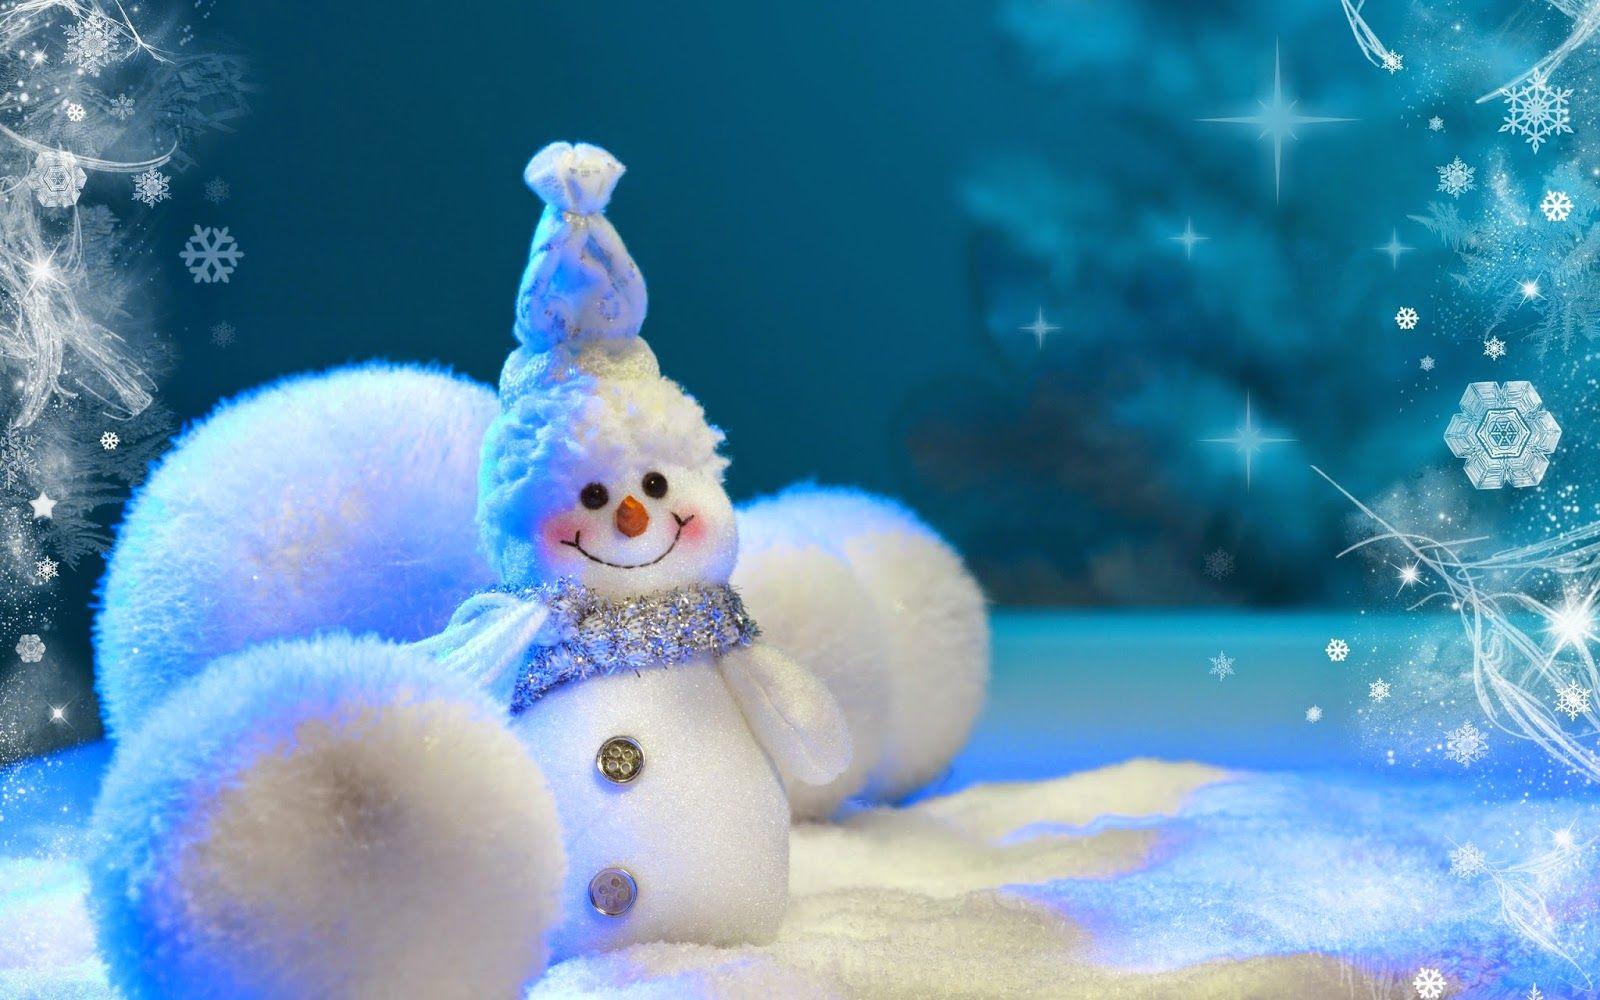 Cute Christmas Snowman image real dress decorations ideas for home